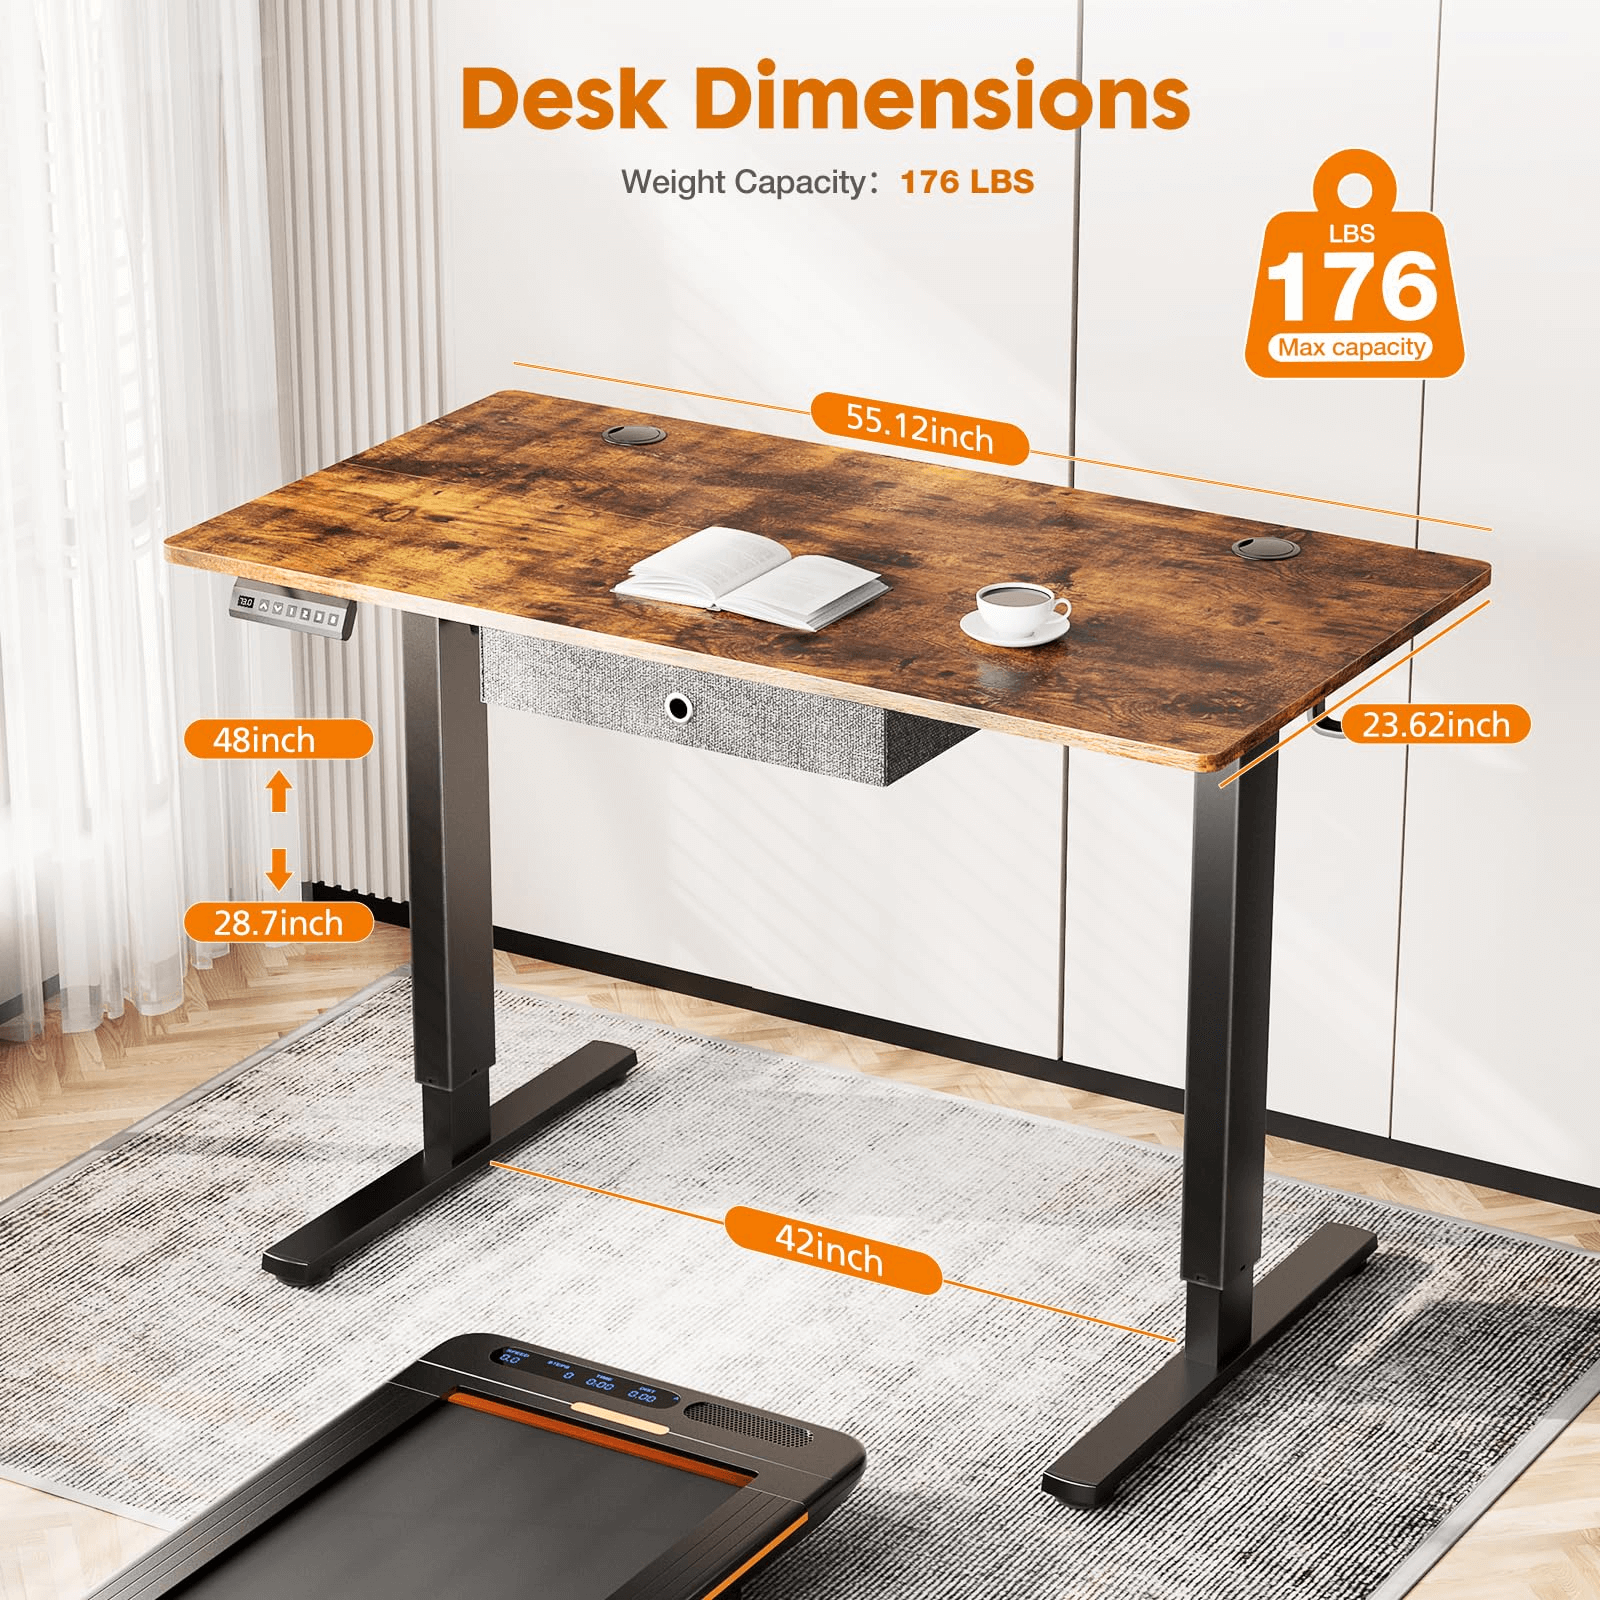 electric-standing-desk-drawer-height-adjustable#size_55*24in